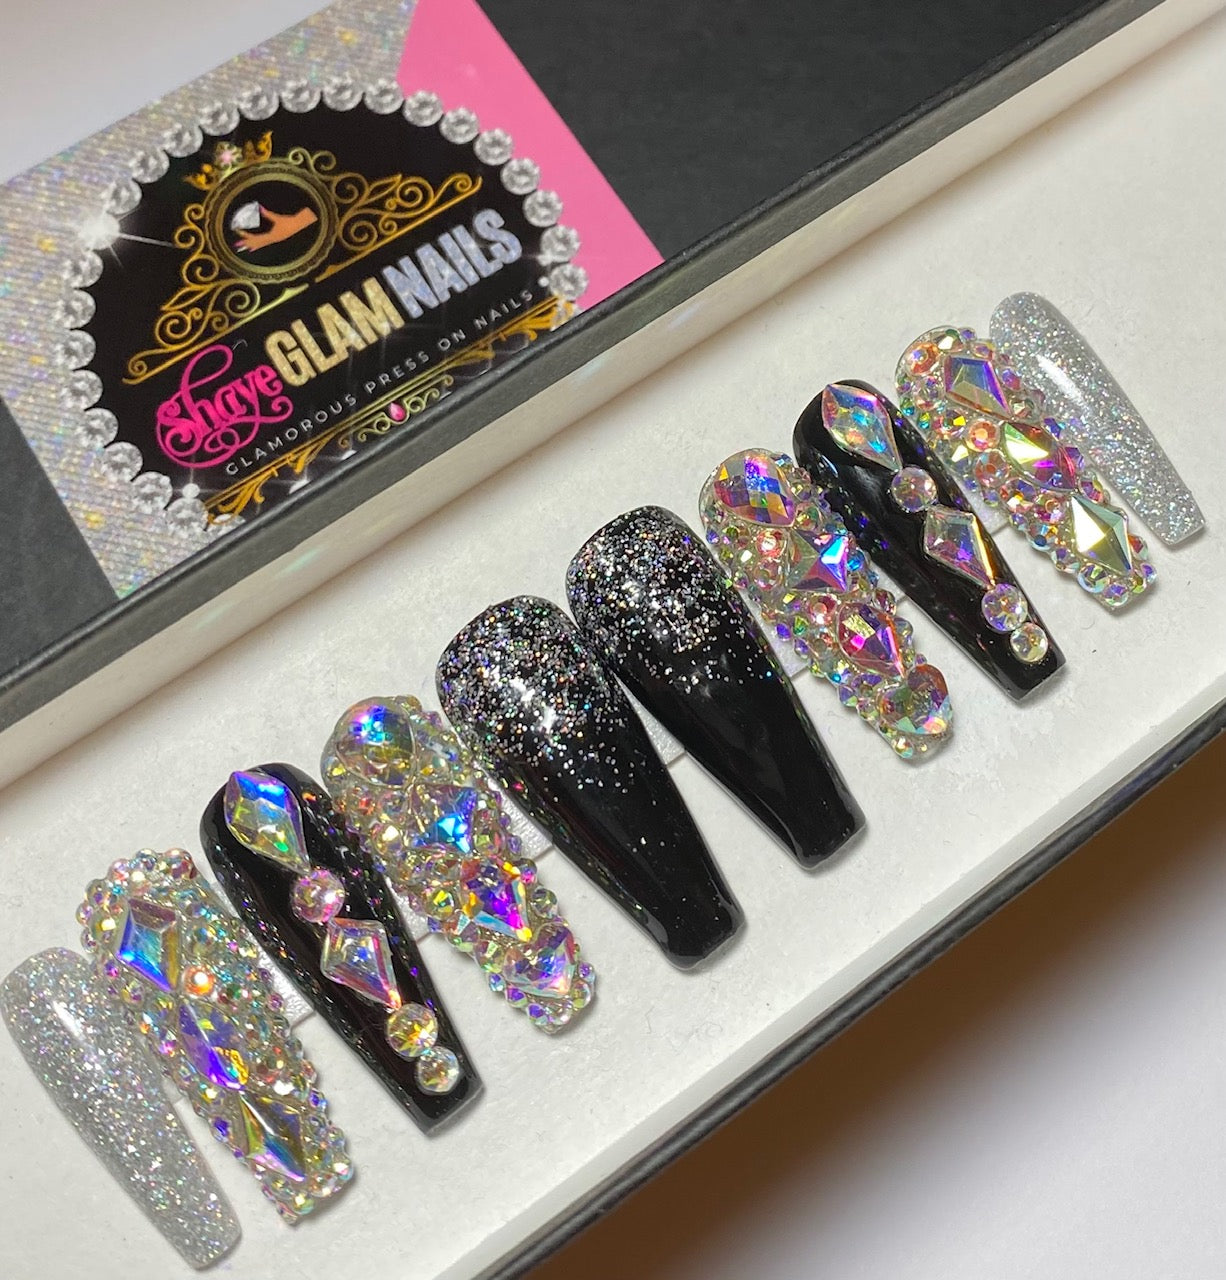 Black Glam and Bling Press On Nails